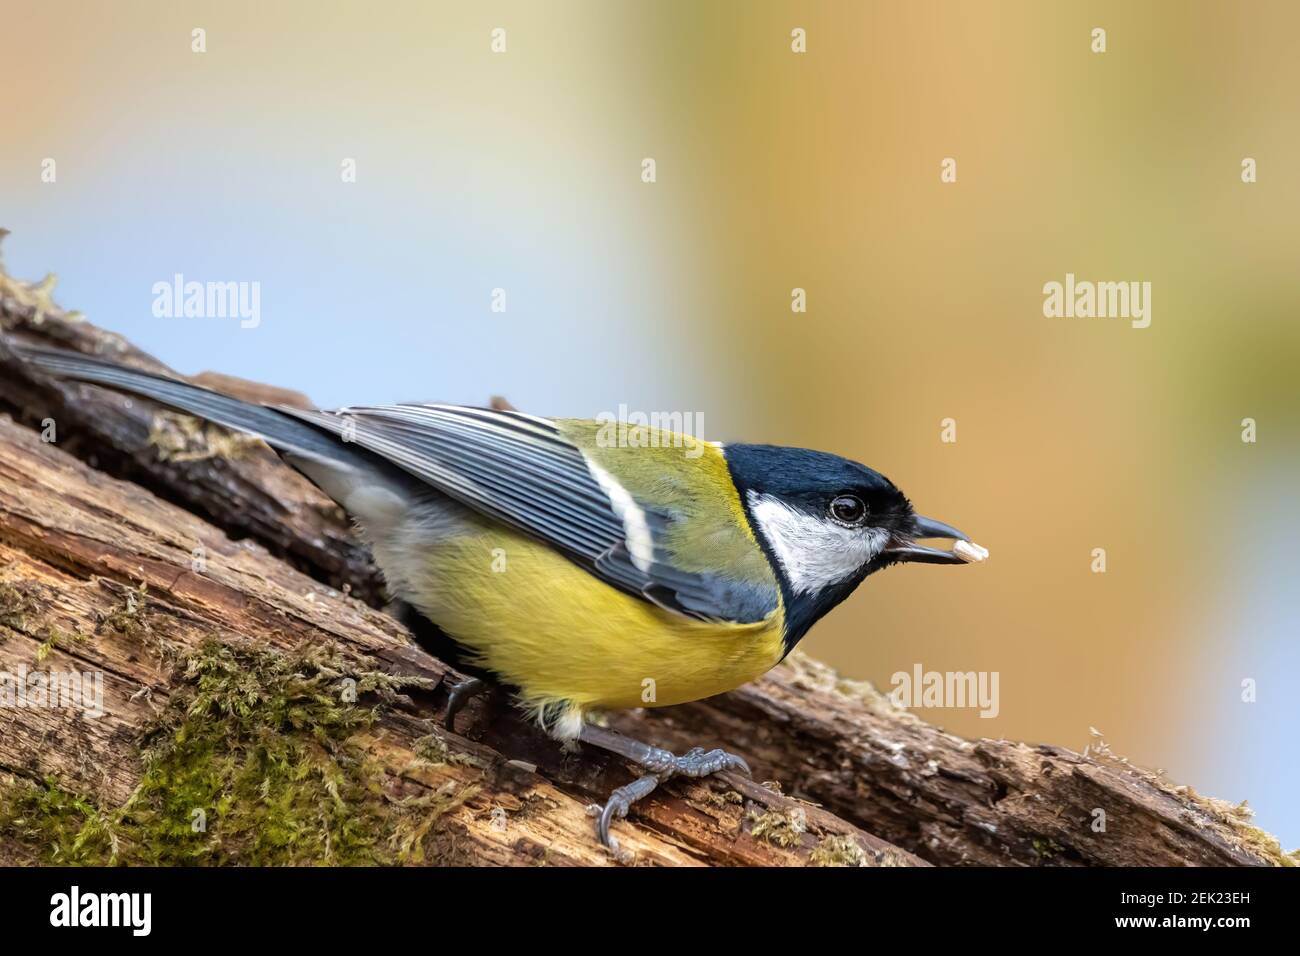 A black tit or also called coal tit at a feeding place at the Mönchbruch pond in a natural reserve in Hesse Germany. Looking for food in winter time. Stock Photo